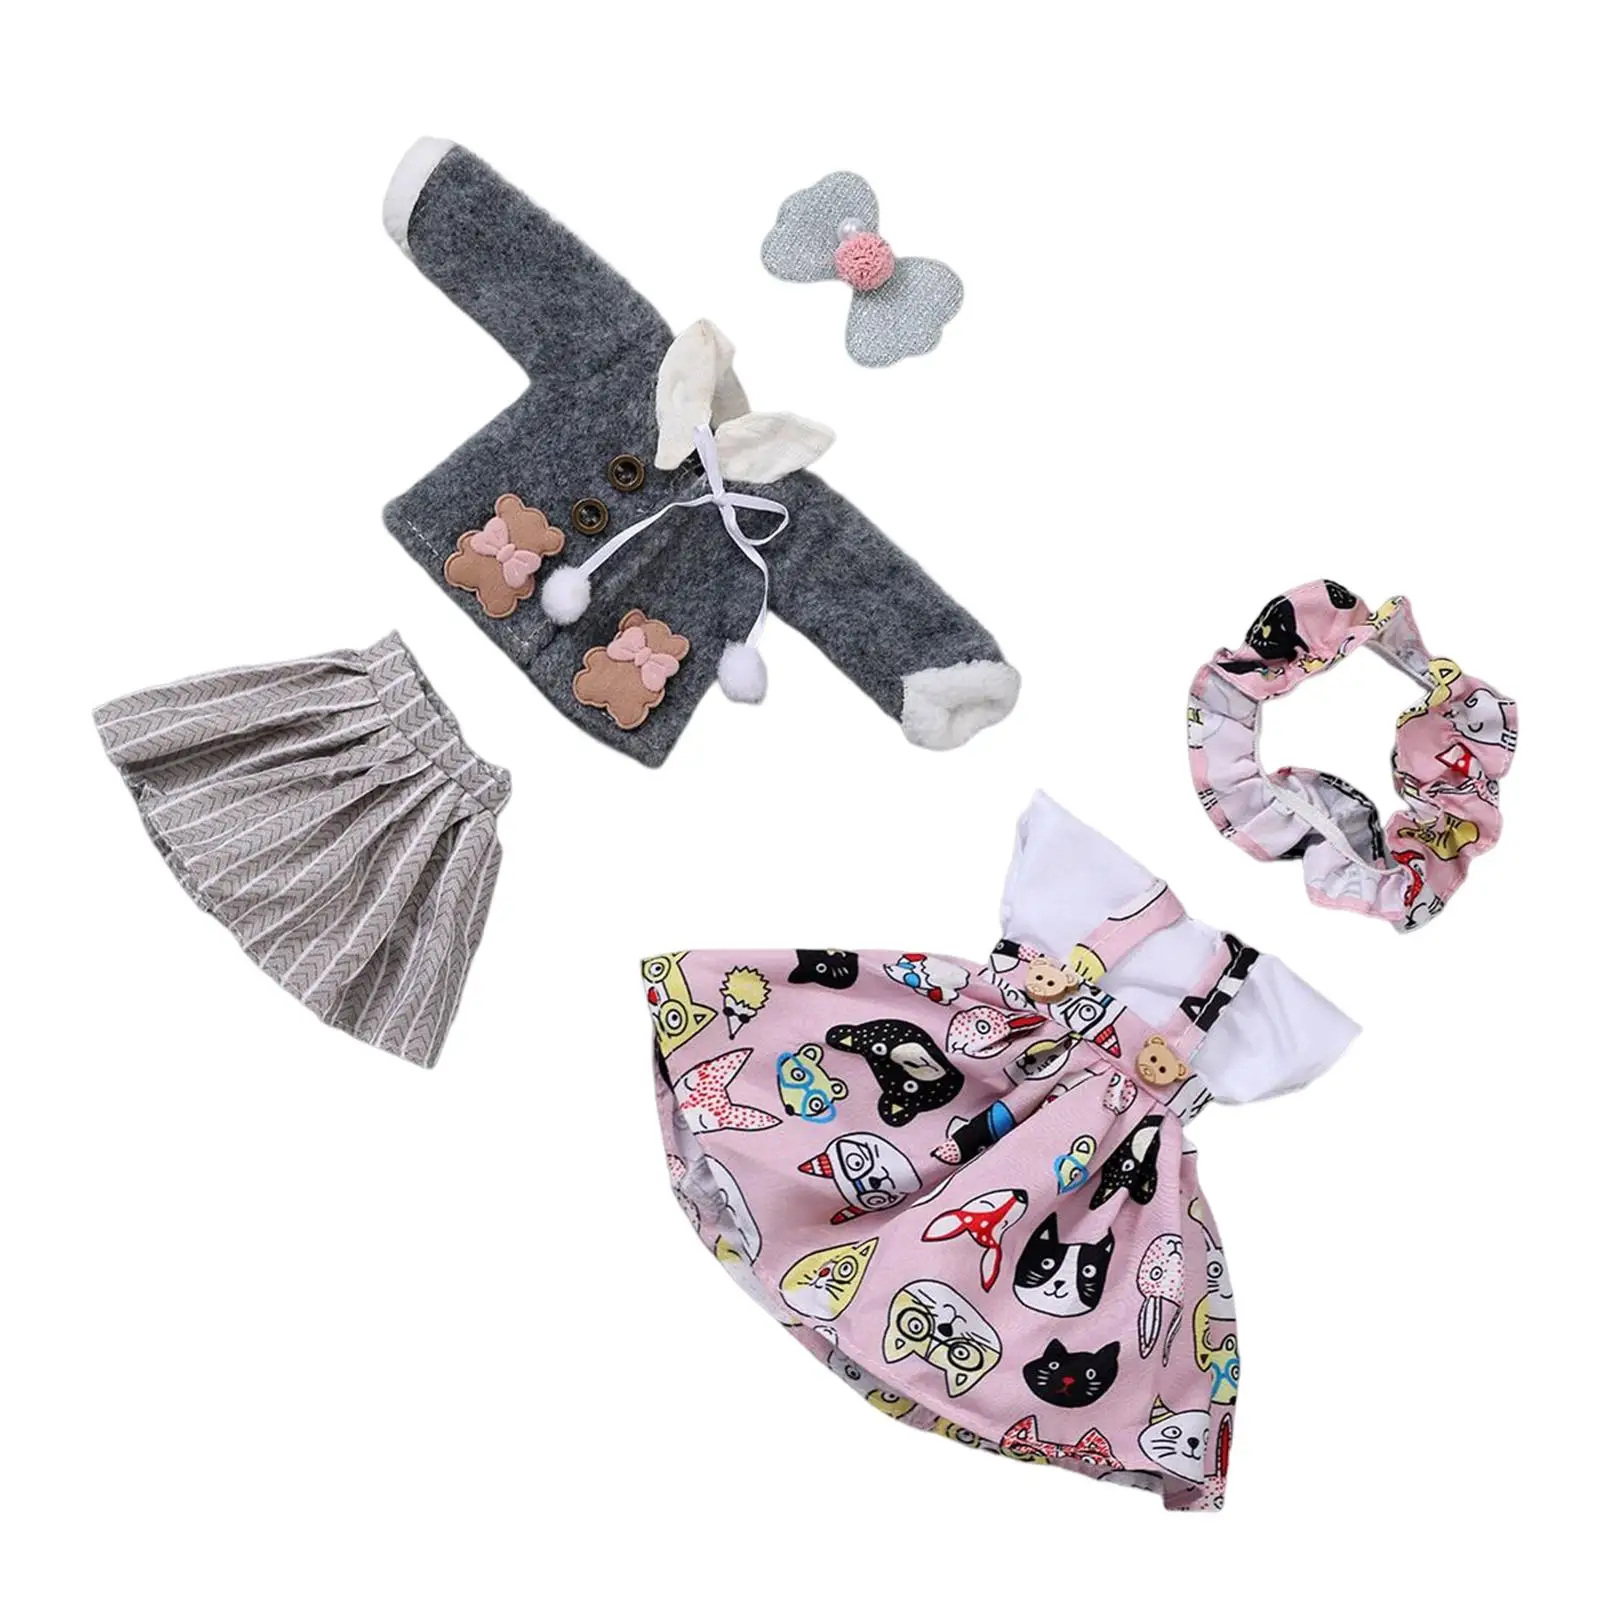 girl Dolls Dress up Accessory Daily Wear Clothing for 1/6 Fashion Doll